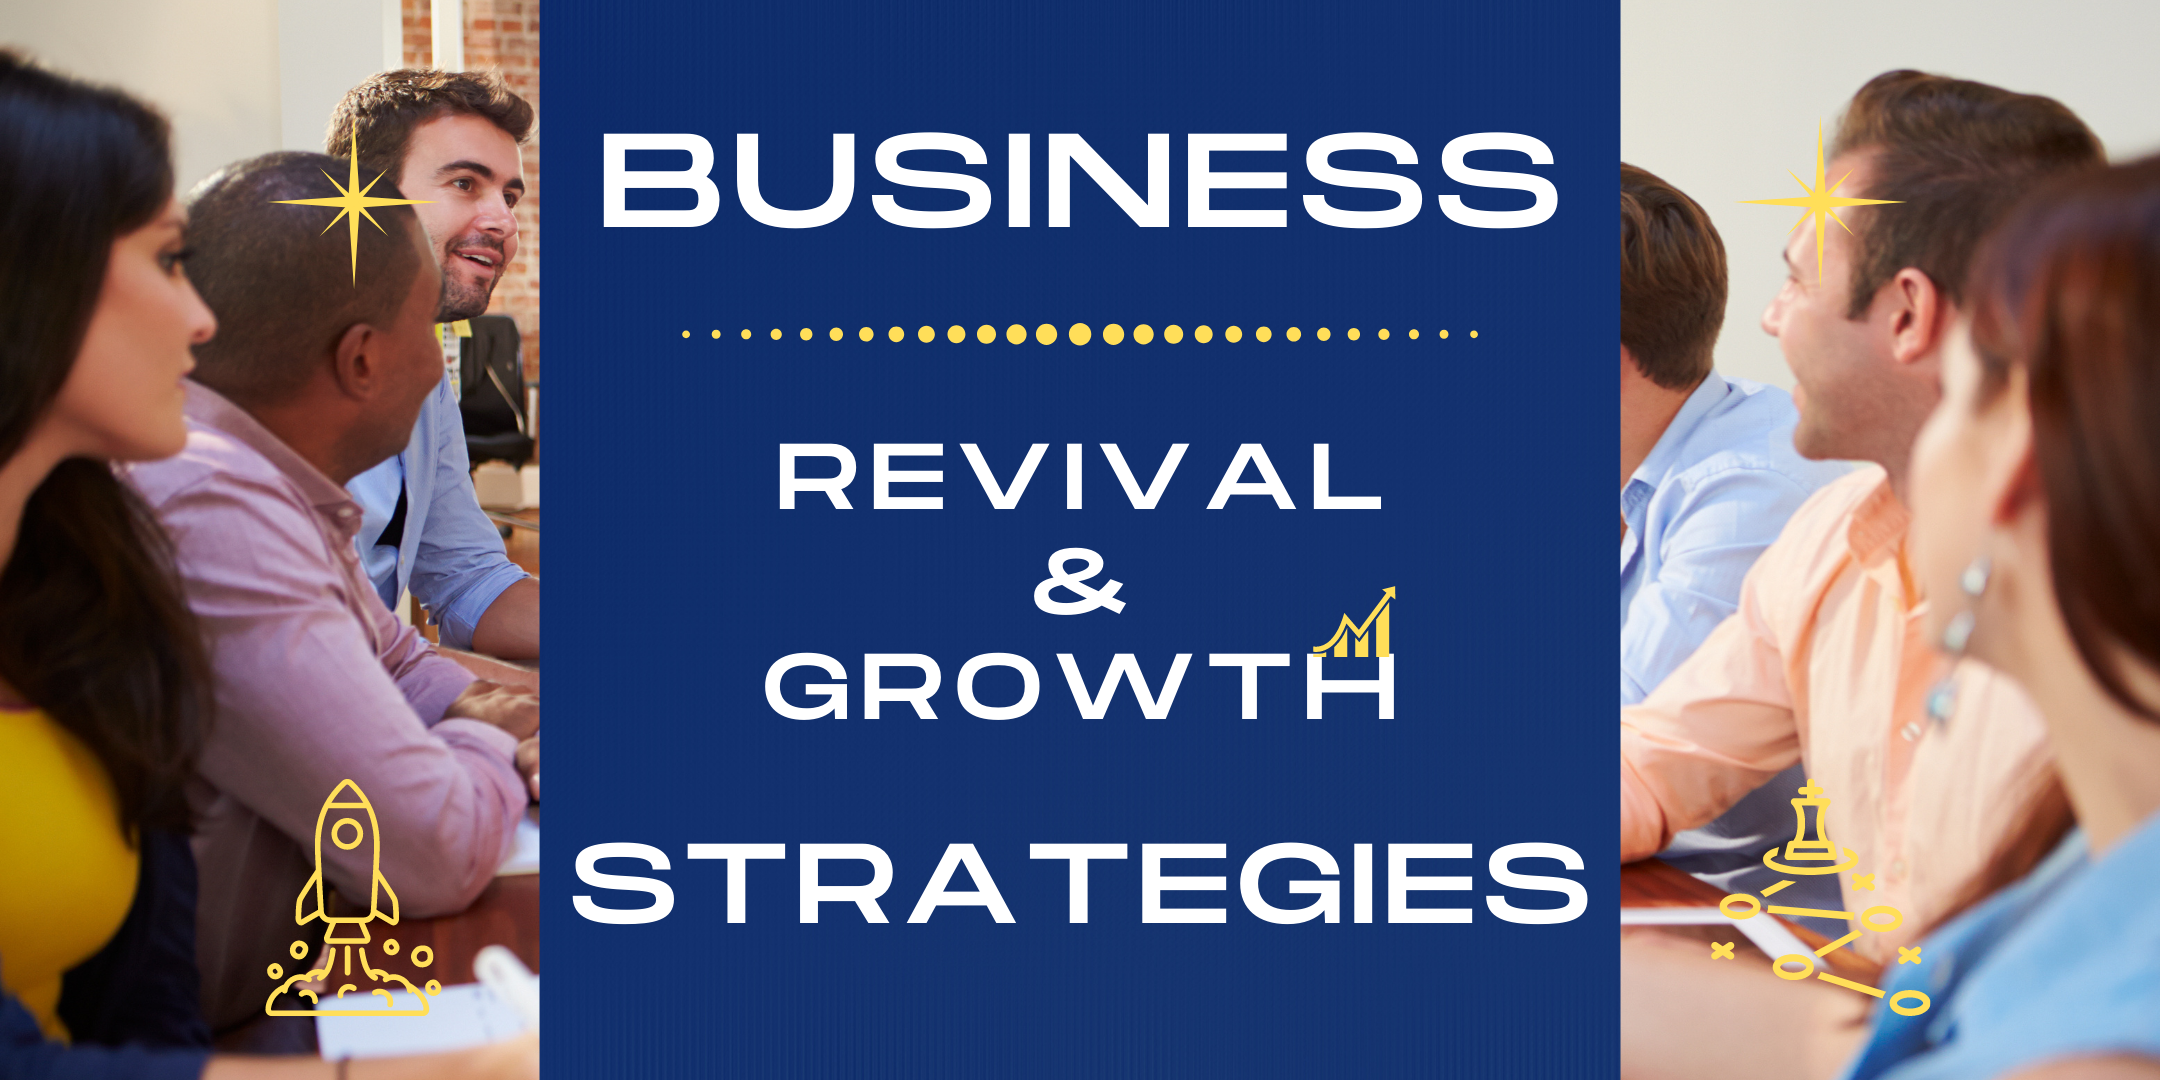 Business Revival & Growth Strategies